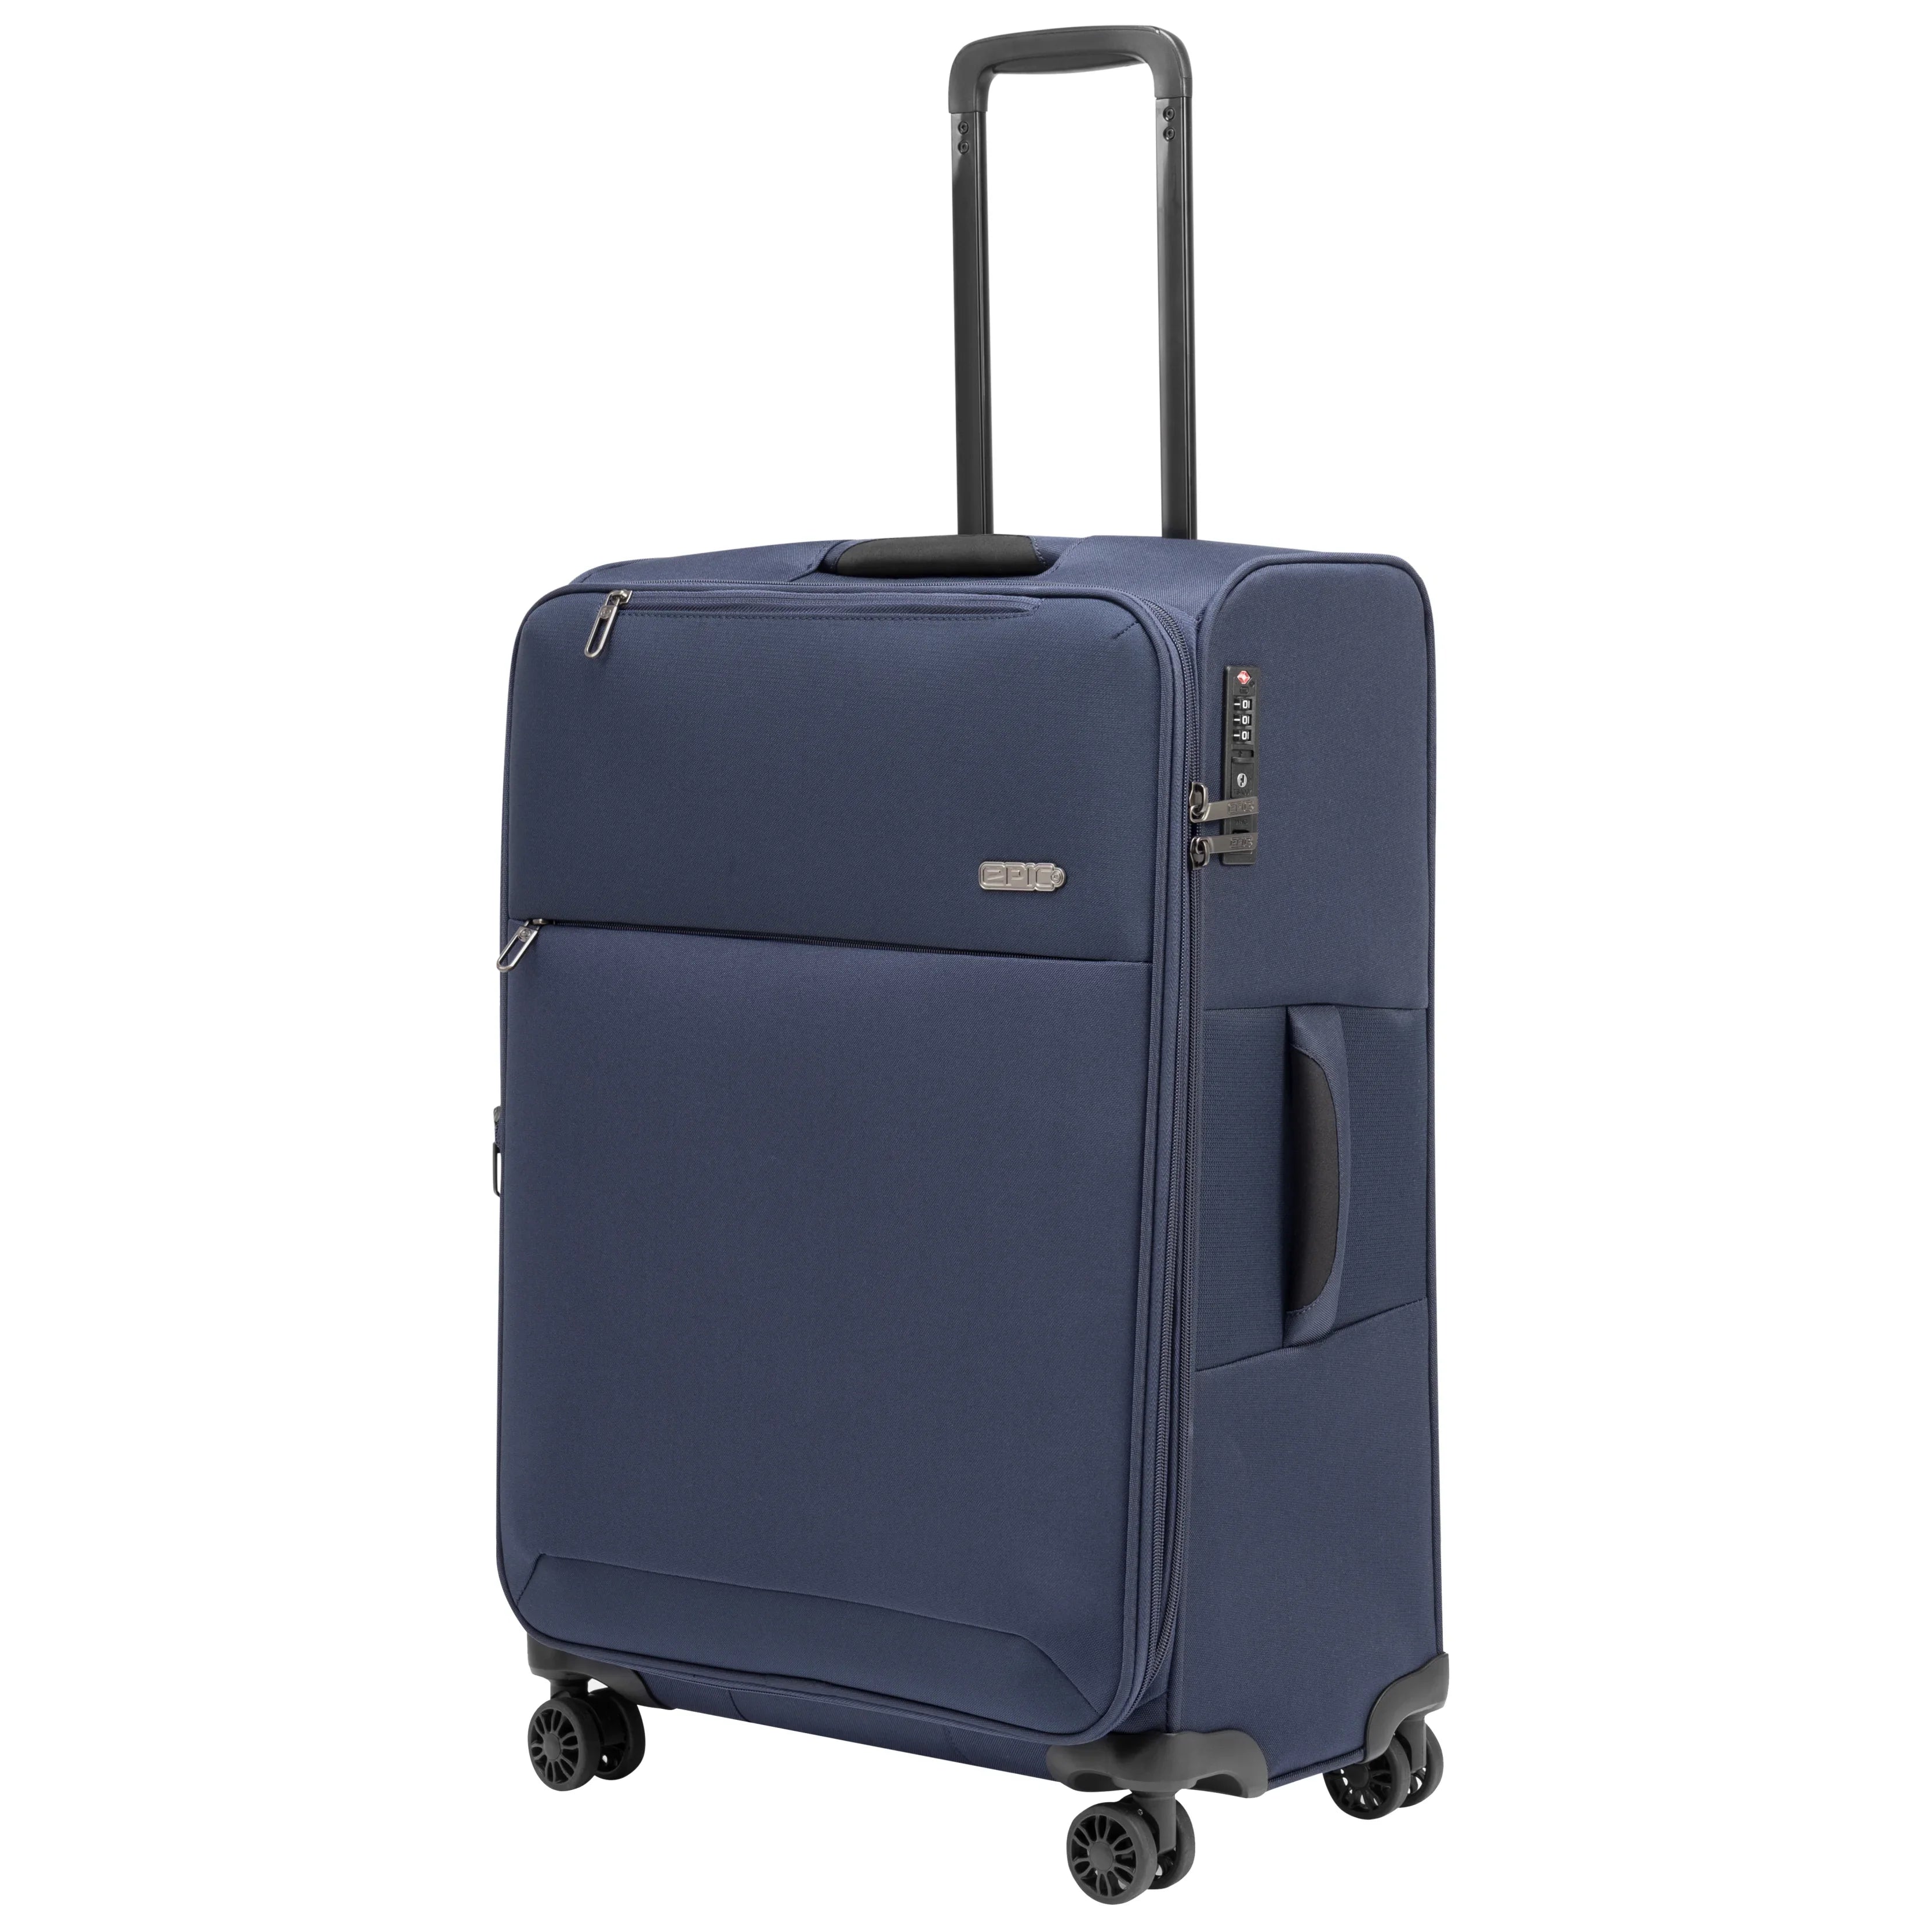 Epic Discovery Neo 4-Rollen Trolley 67 cm - navy blue